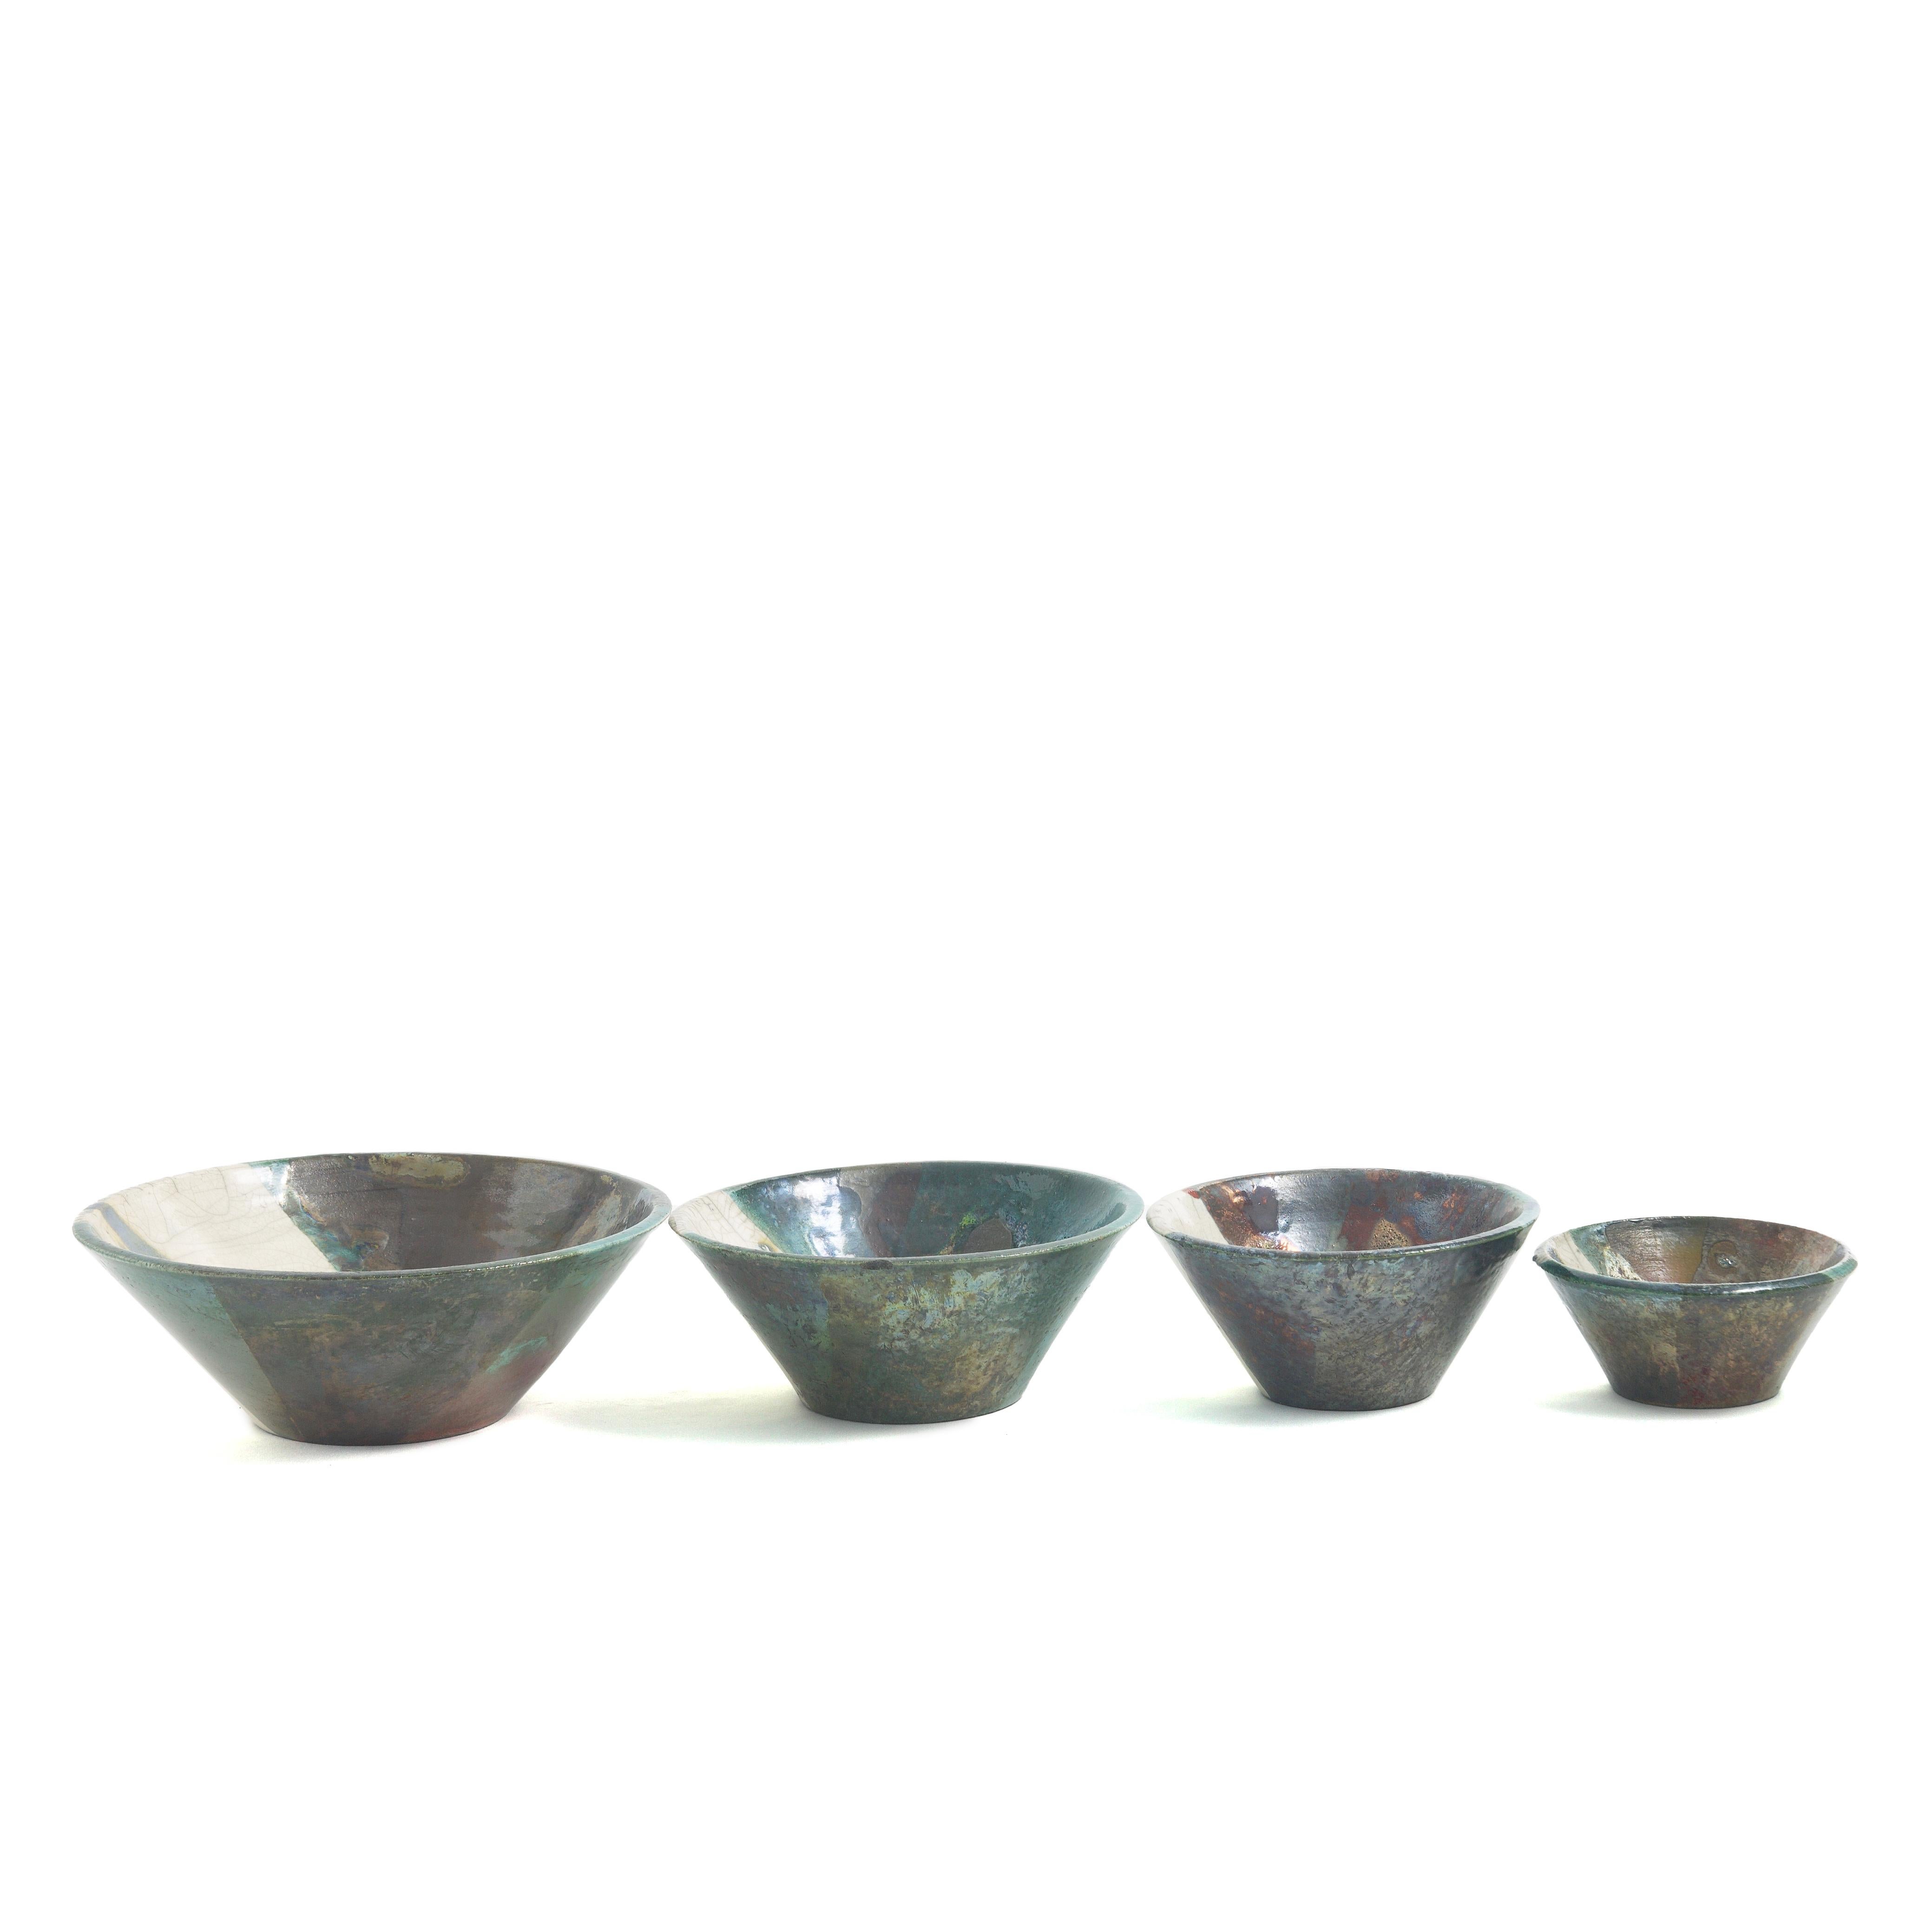 Aurora Set Of 4 Bowls

This superb set of four bowls actualizes a refined synthesis between abstract art and impeccable craftsmanship, resulting in a functional design that is sure to impress whatever the use. Handcrafted following the ancient